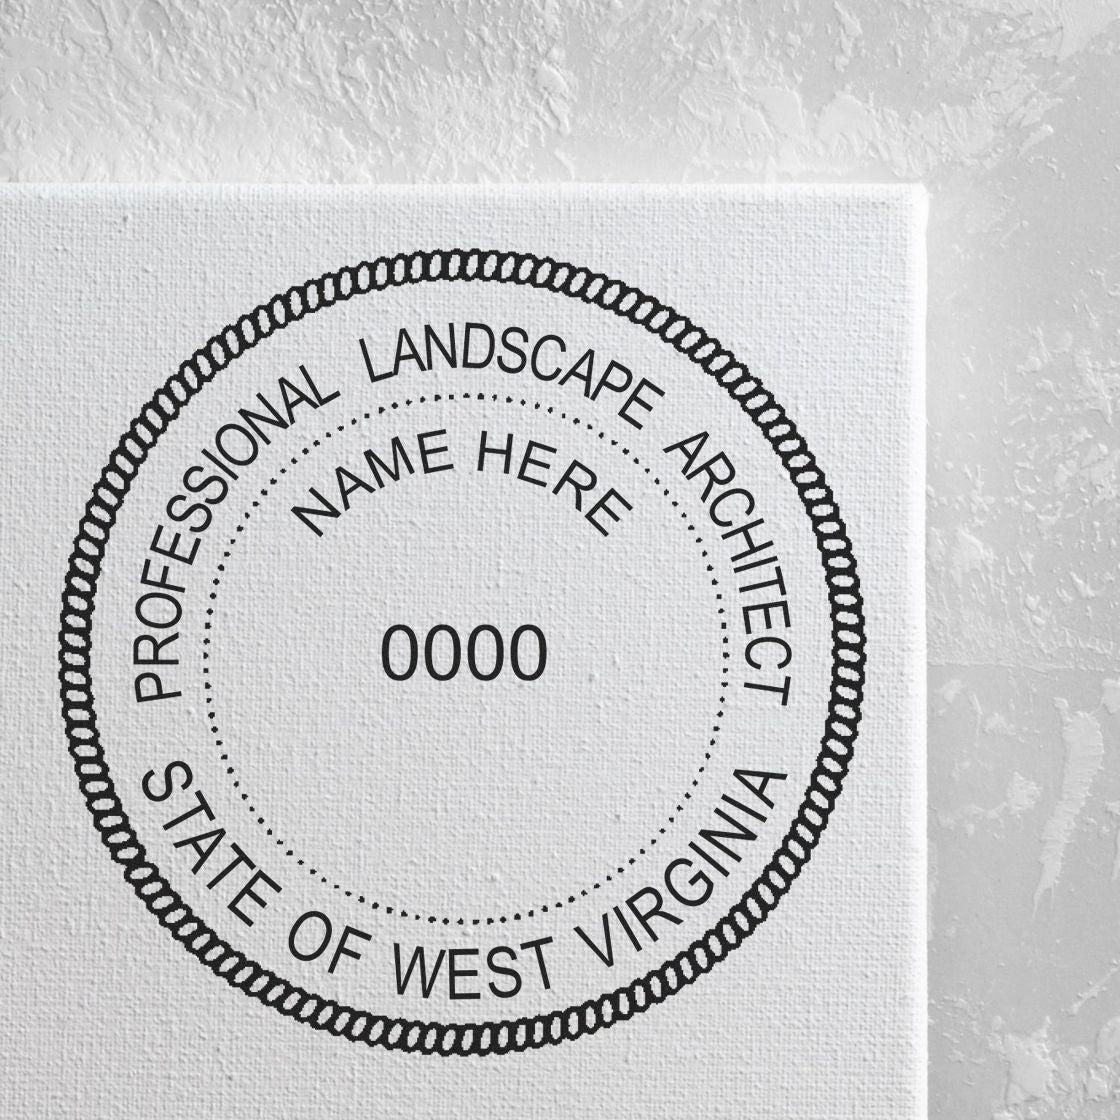 This paper is stamped with a sample imprint of the Slim Pre-Inked West Virginia Landscape Architect Seal Stamp, signifying its quality and reliability.